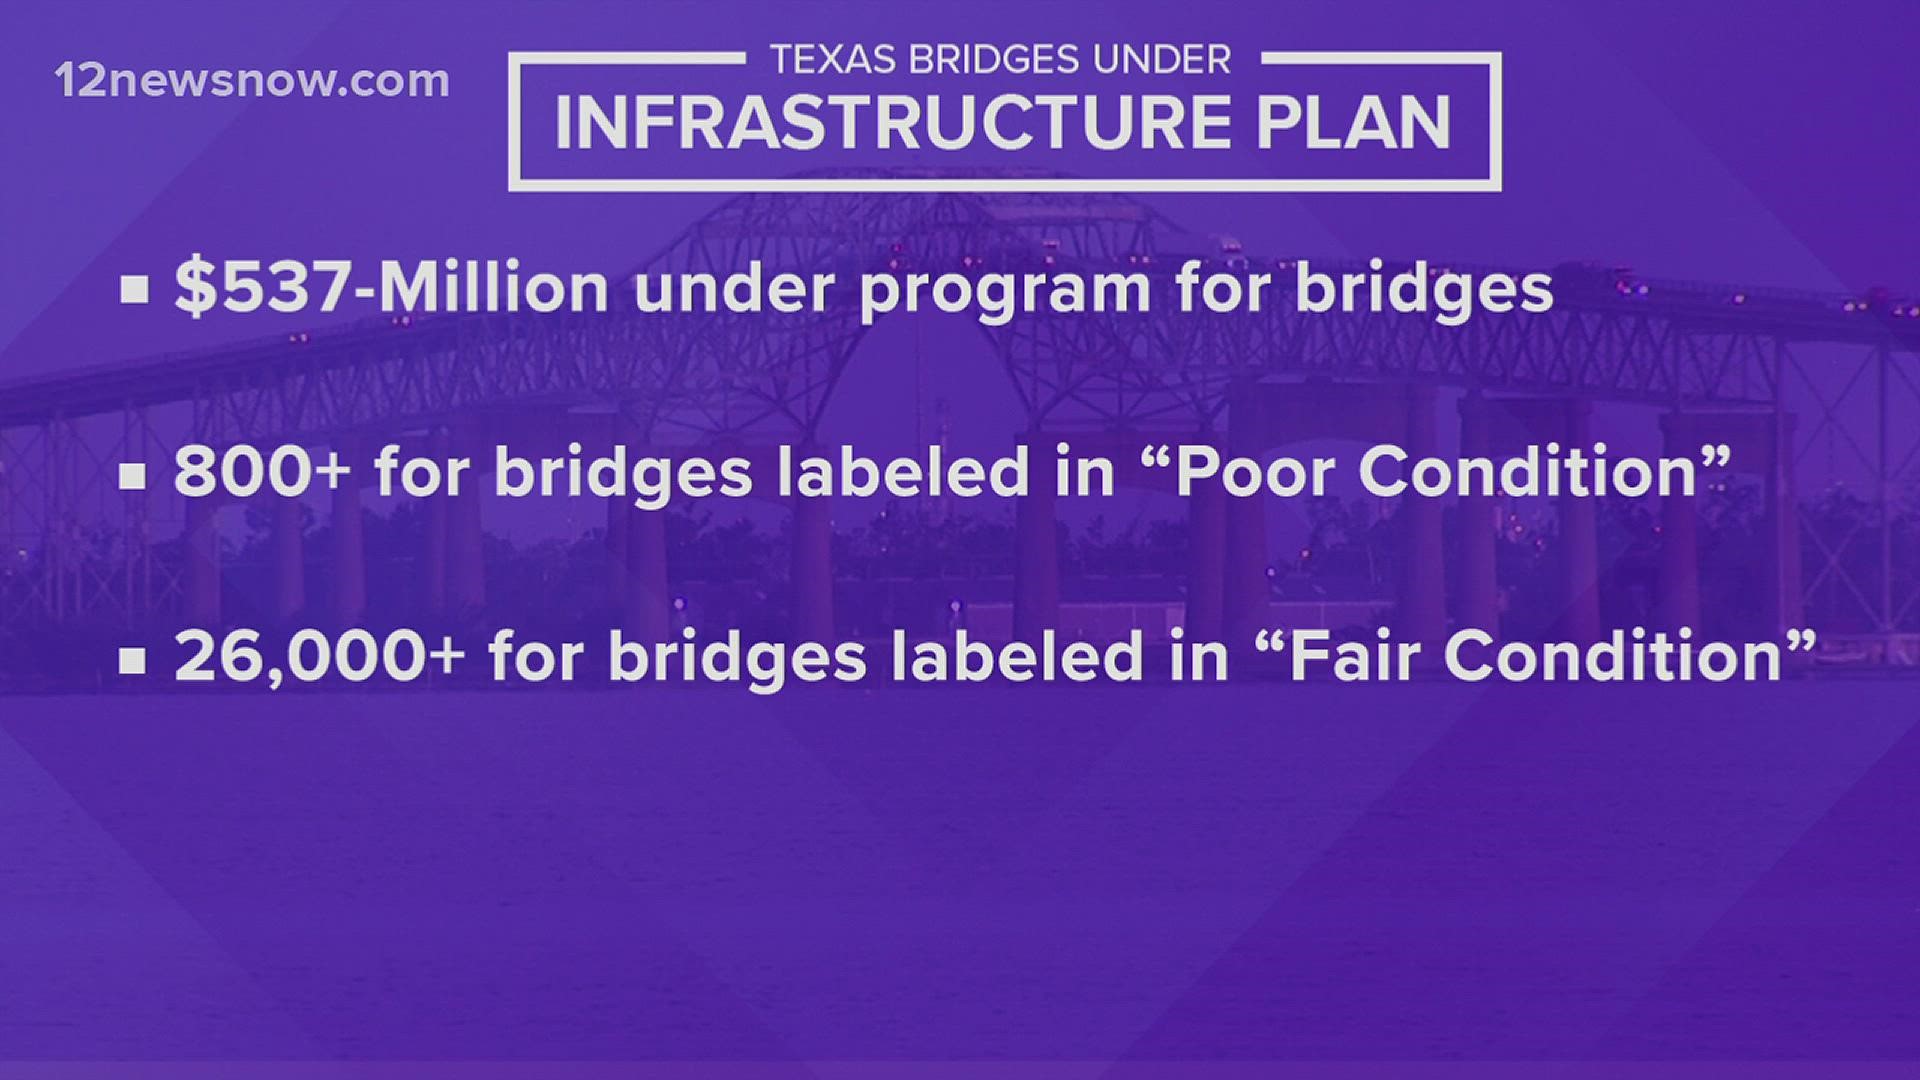 Biden said the focus of the fund should be on smaller bridges located in rural areas.